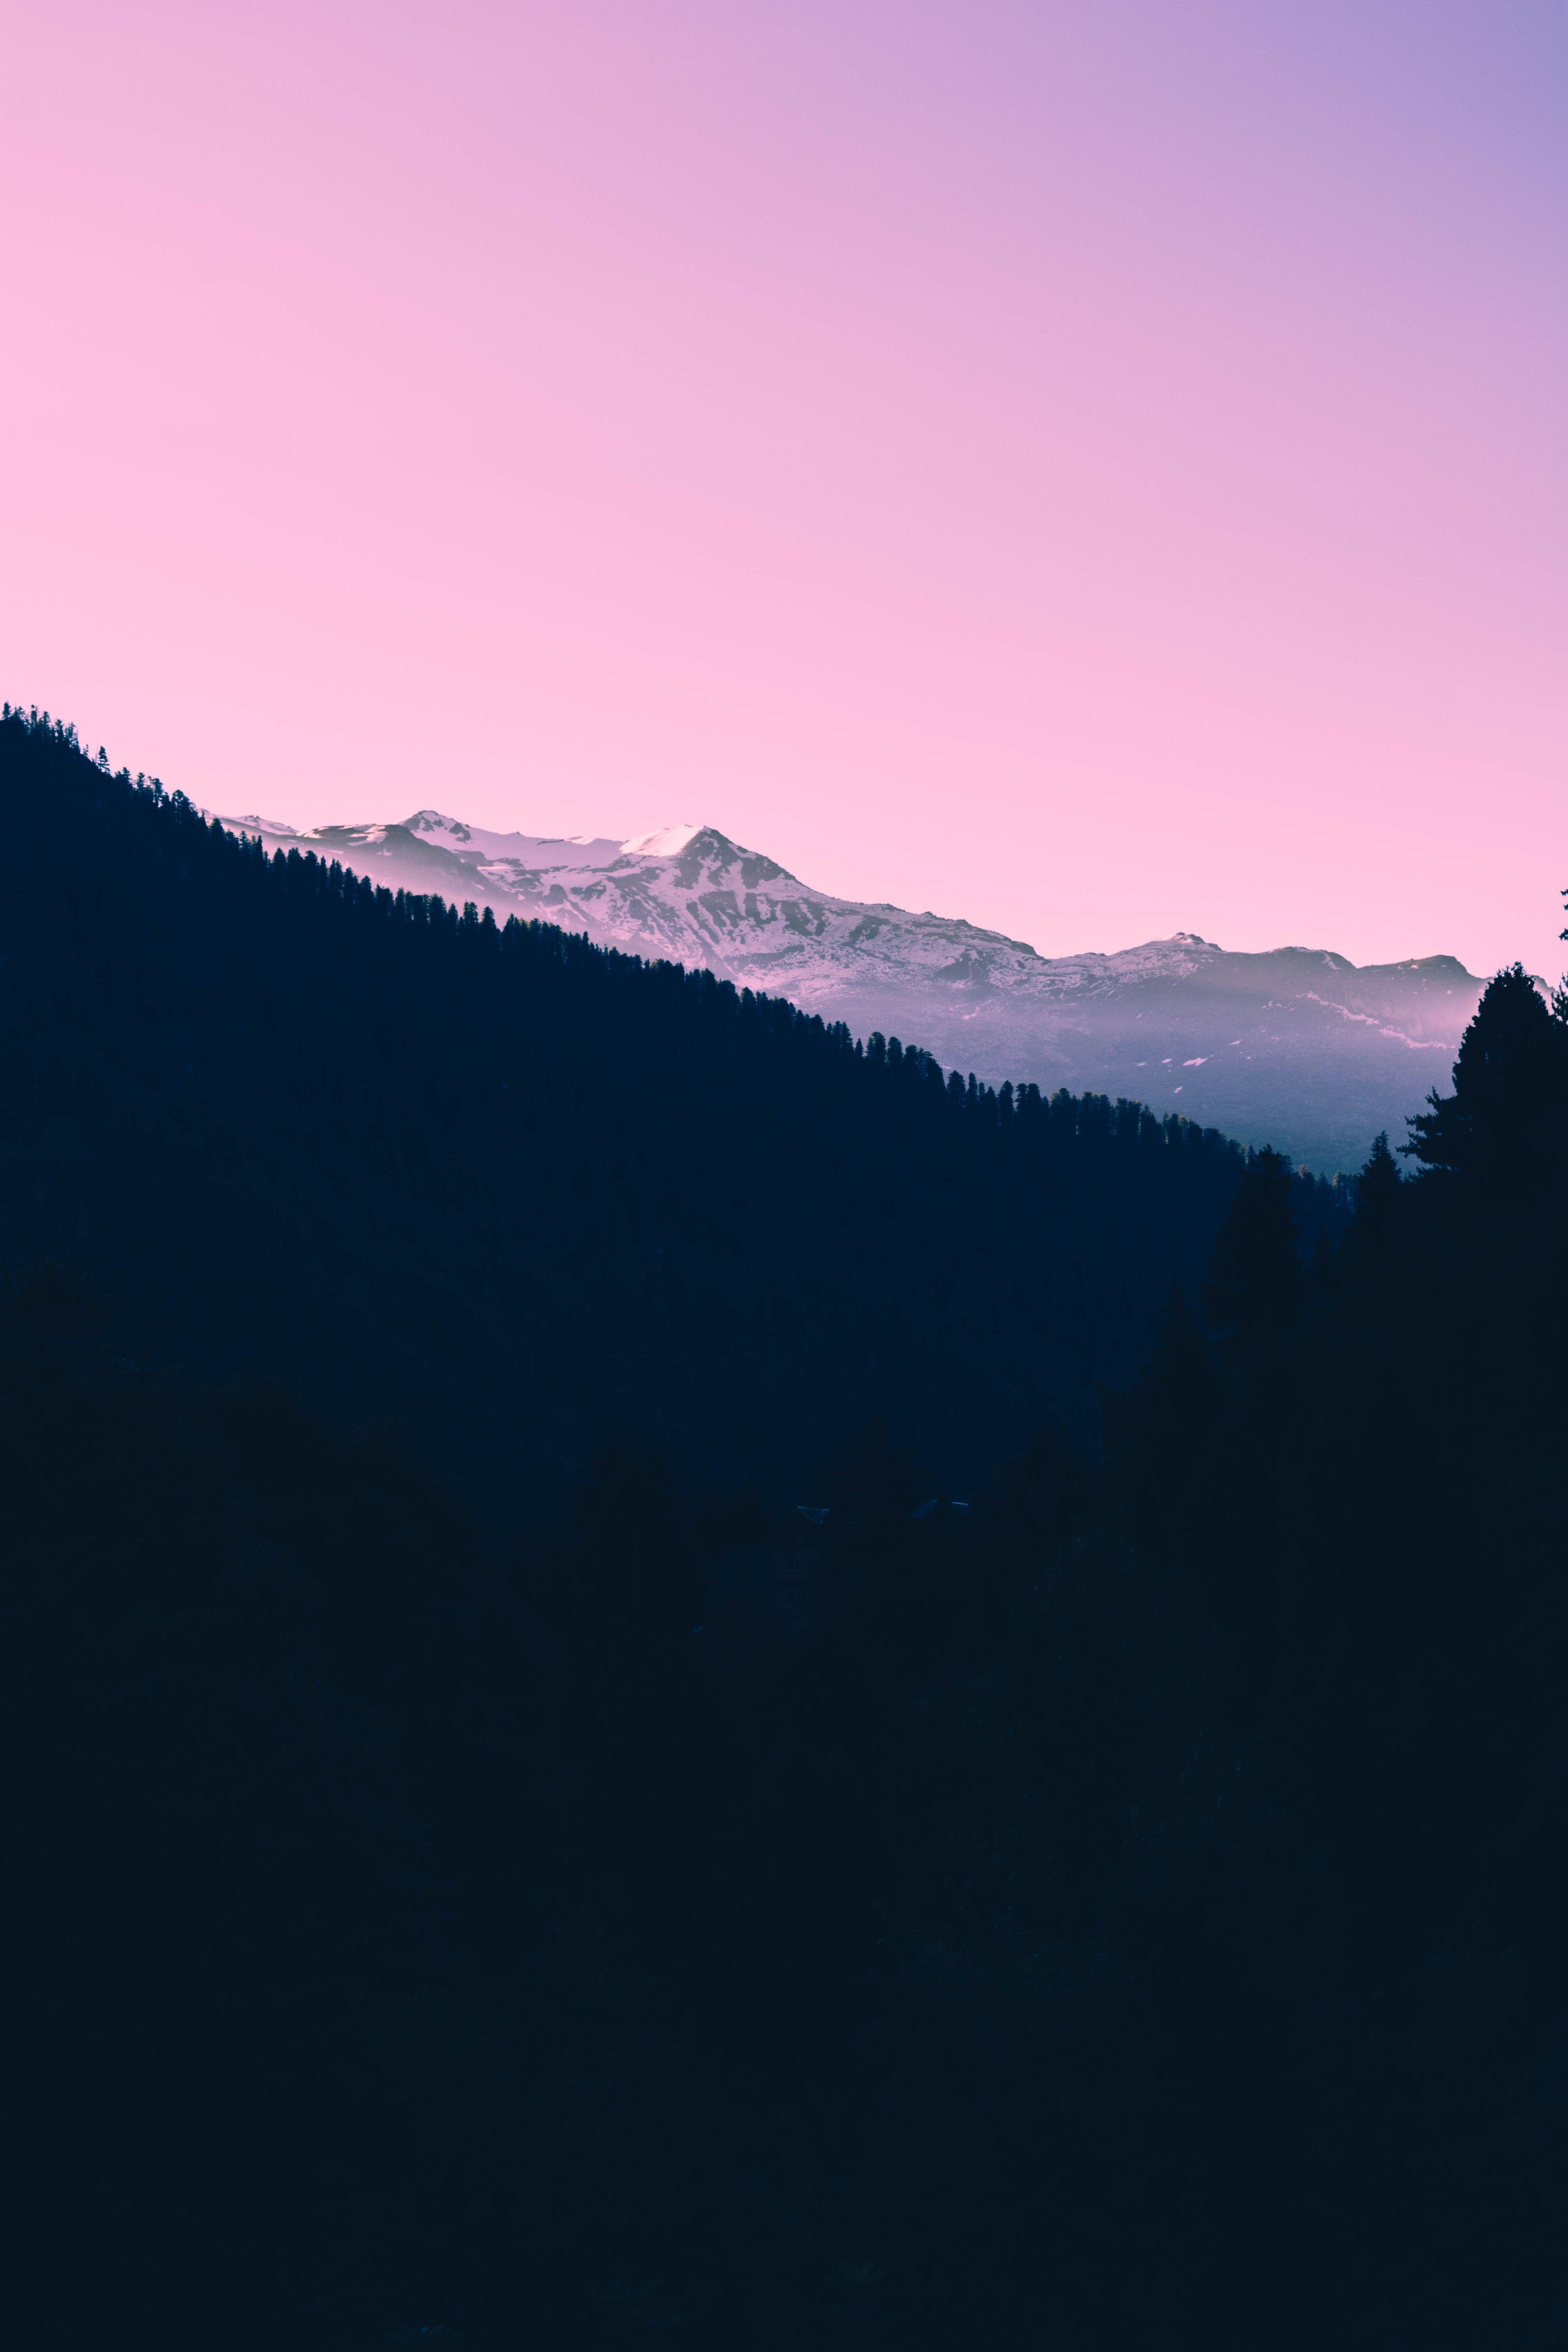 A dark sunset over snow covered mountains and a pink sky